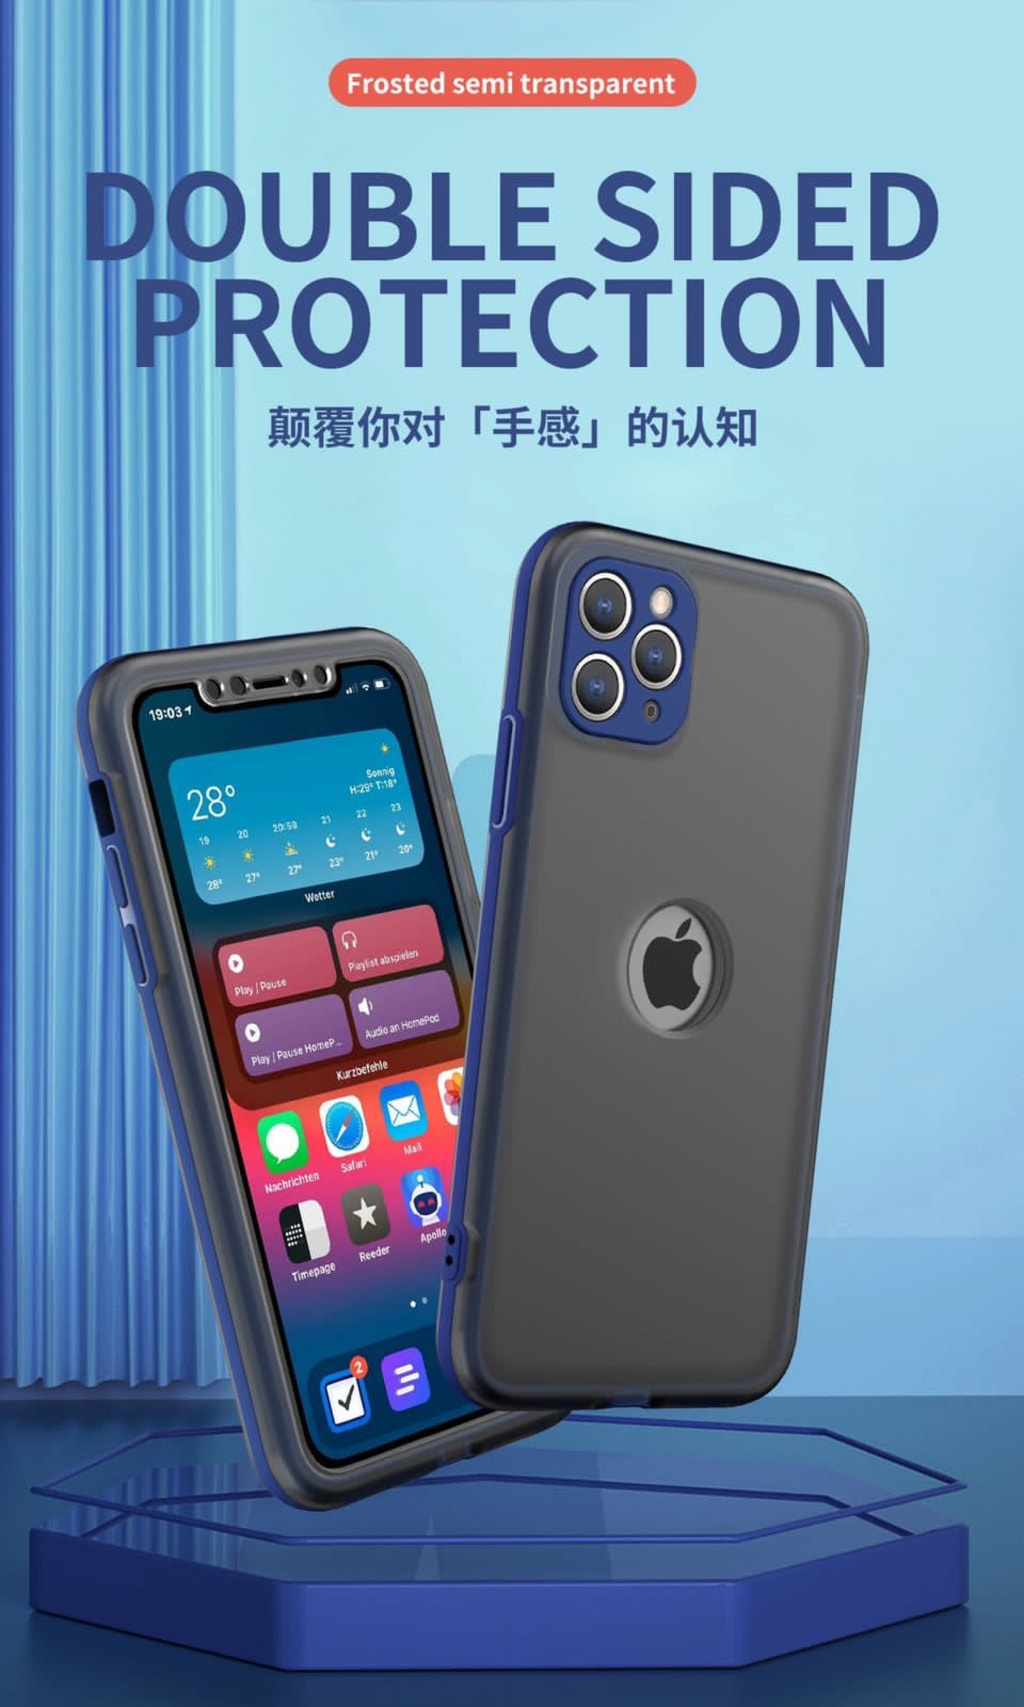 SOFTCASE FROSTED SEMI TRANSPARENT ( DOUBLE SIDED PROTECT) 3 IN 1 di qeong.com